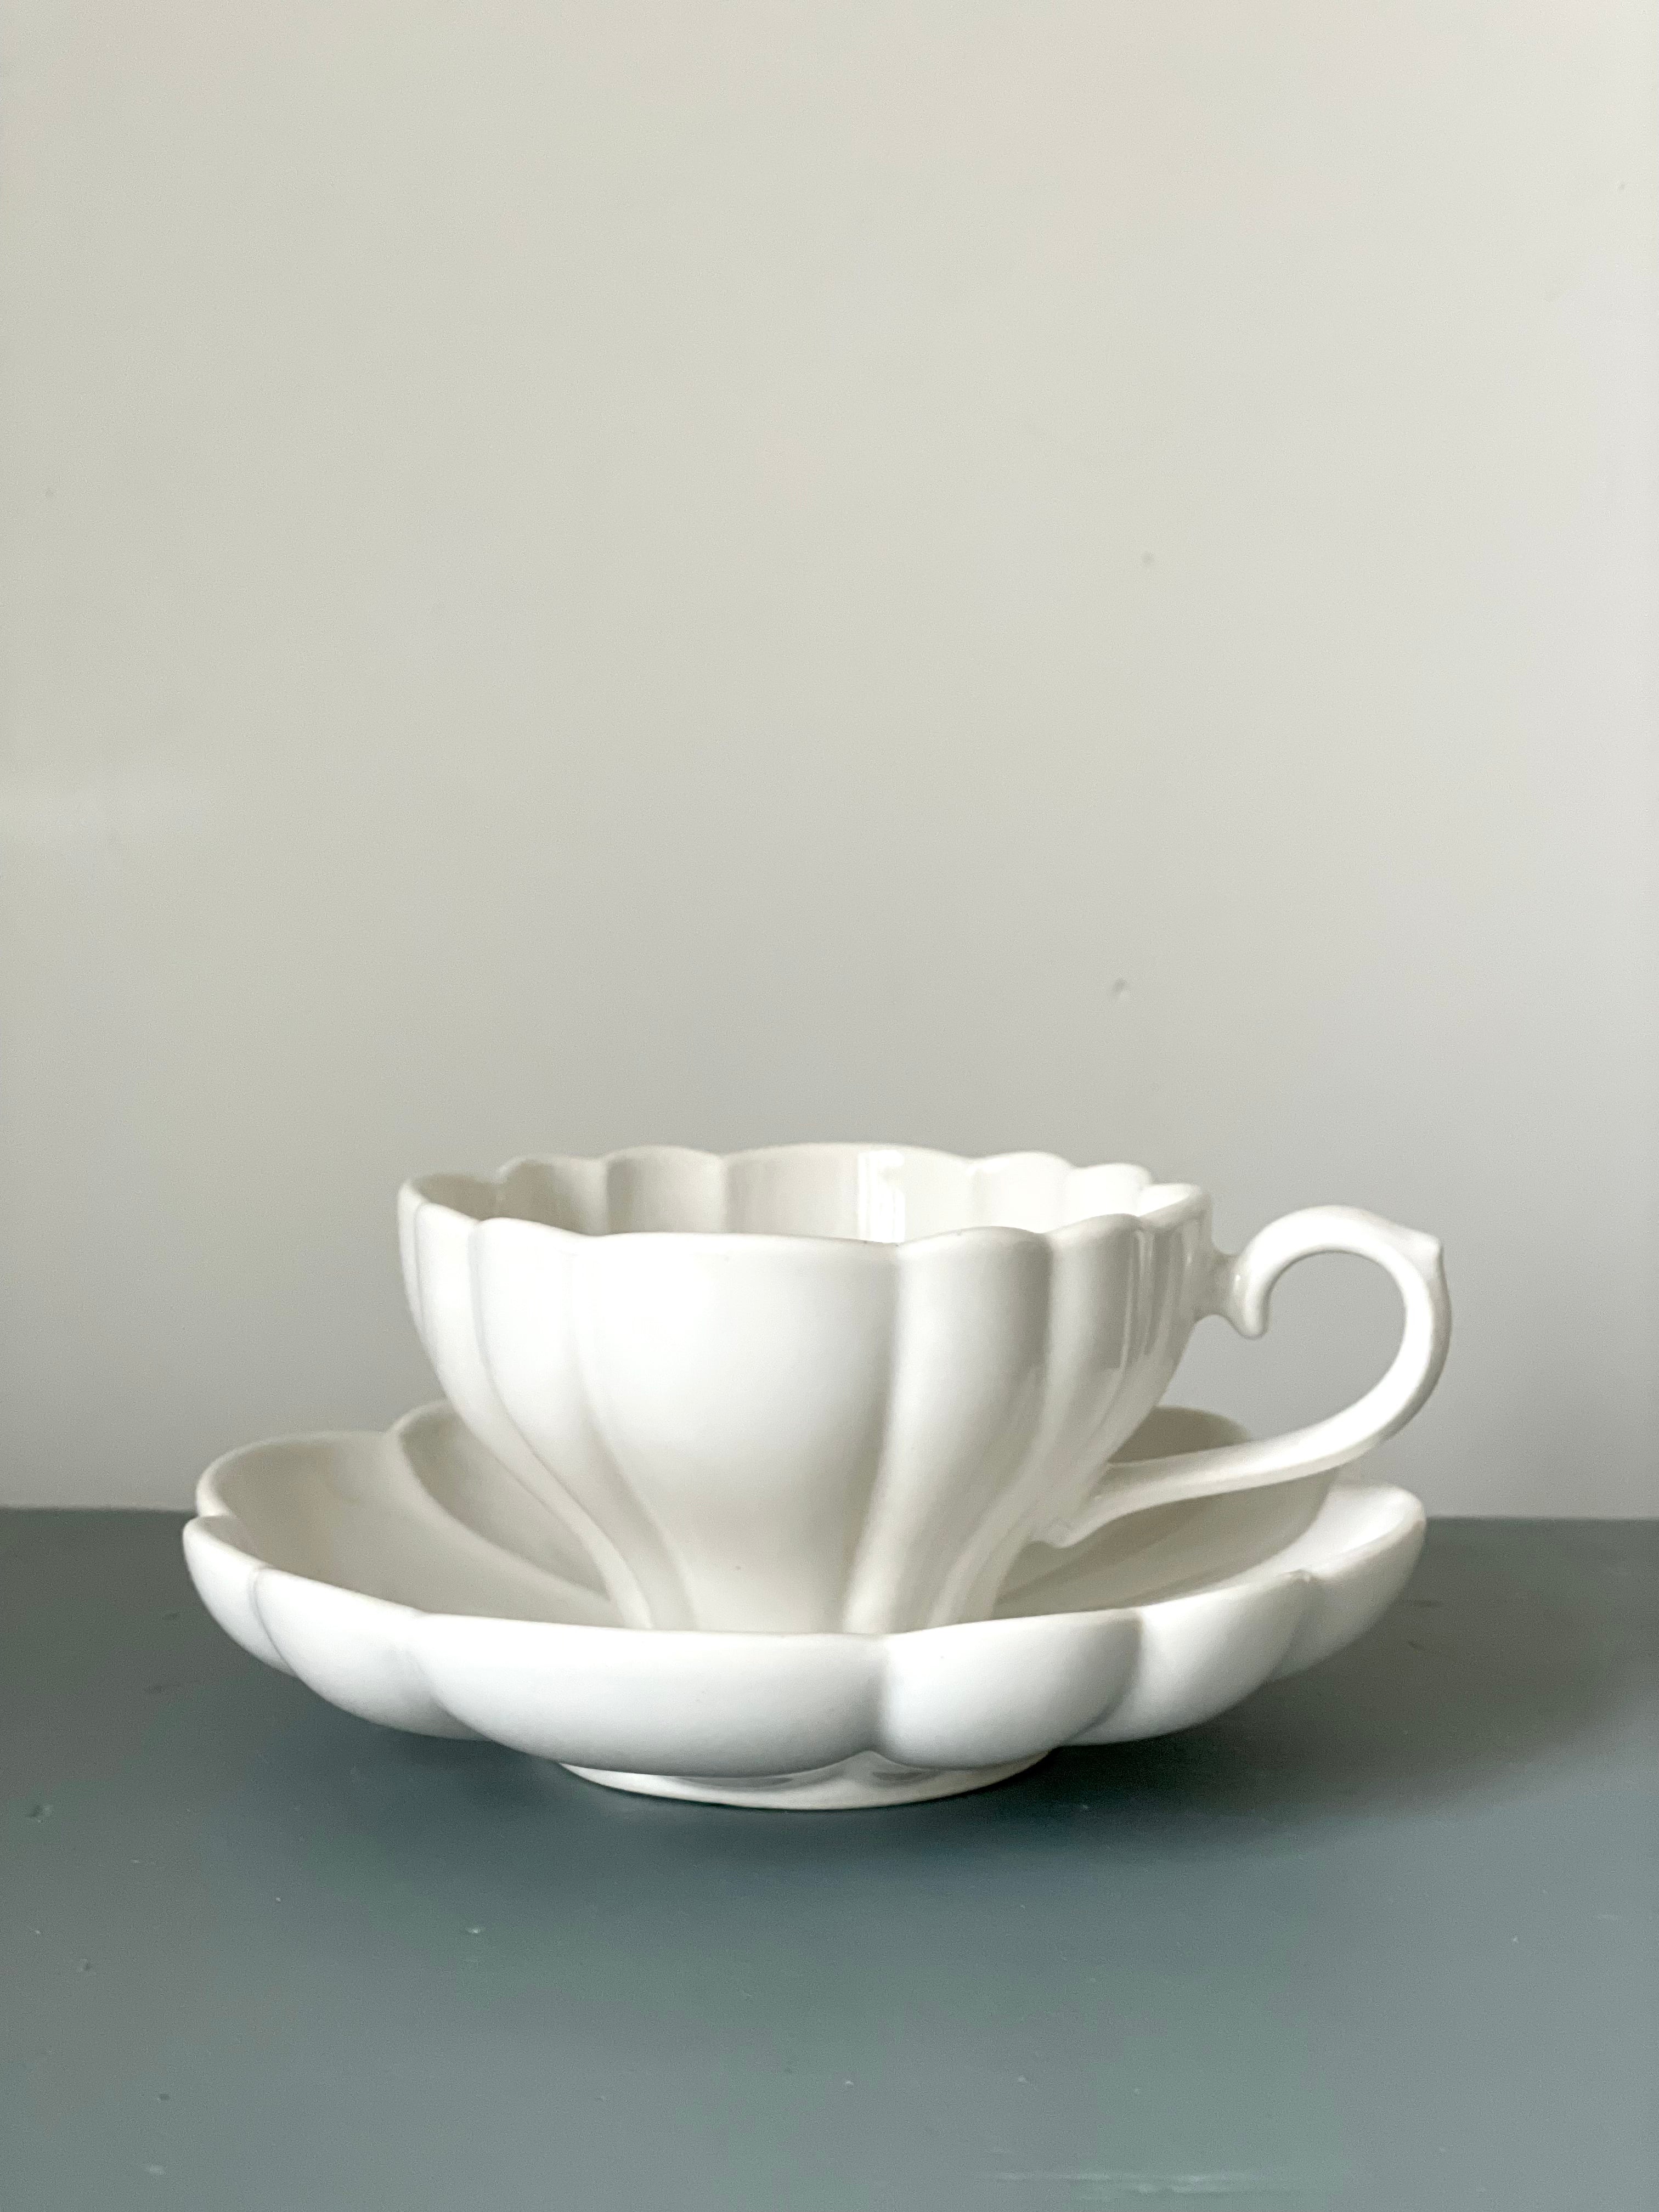 Flower cup with saucer; white